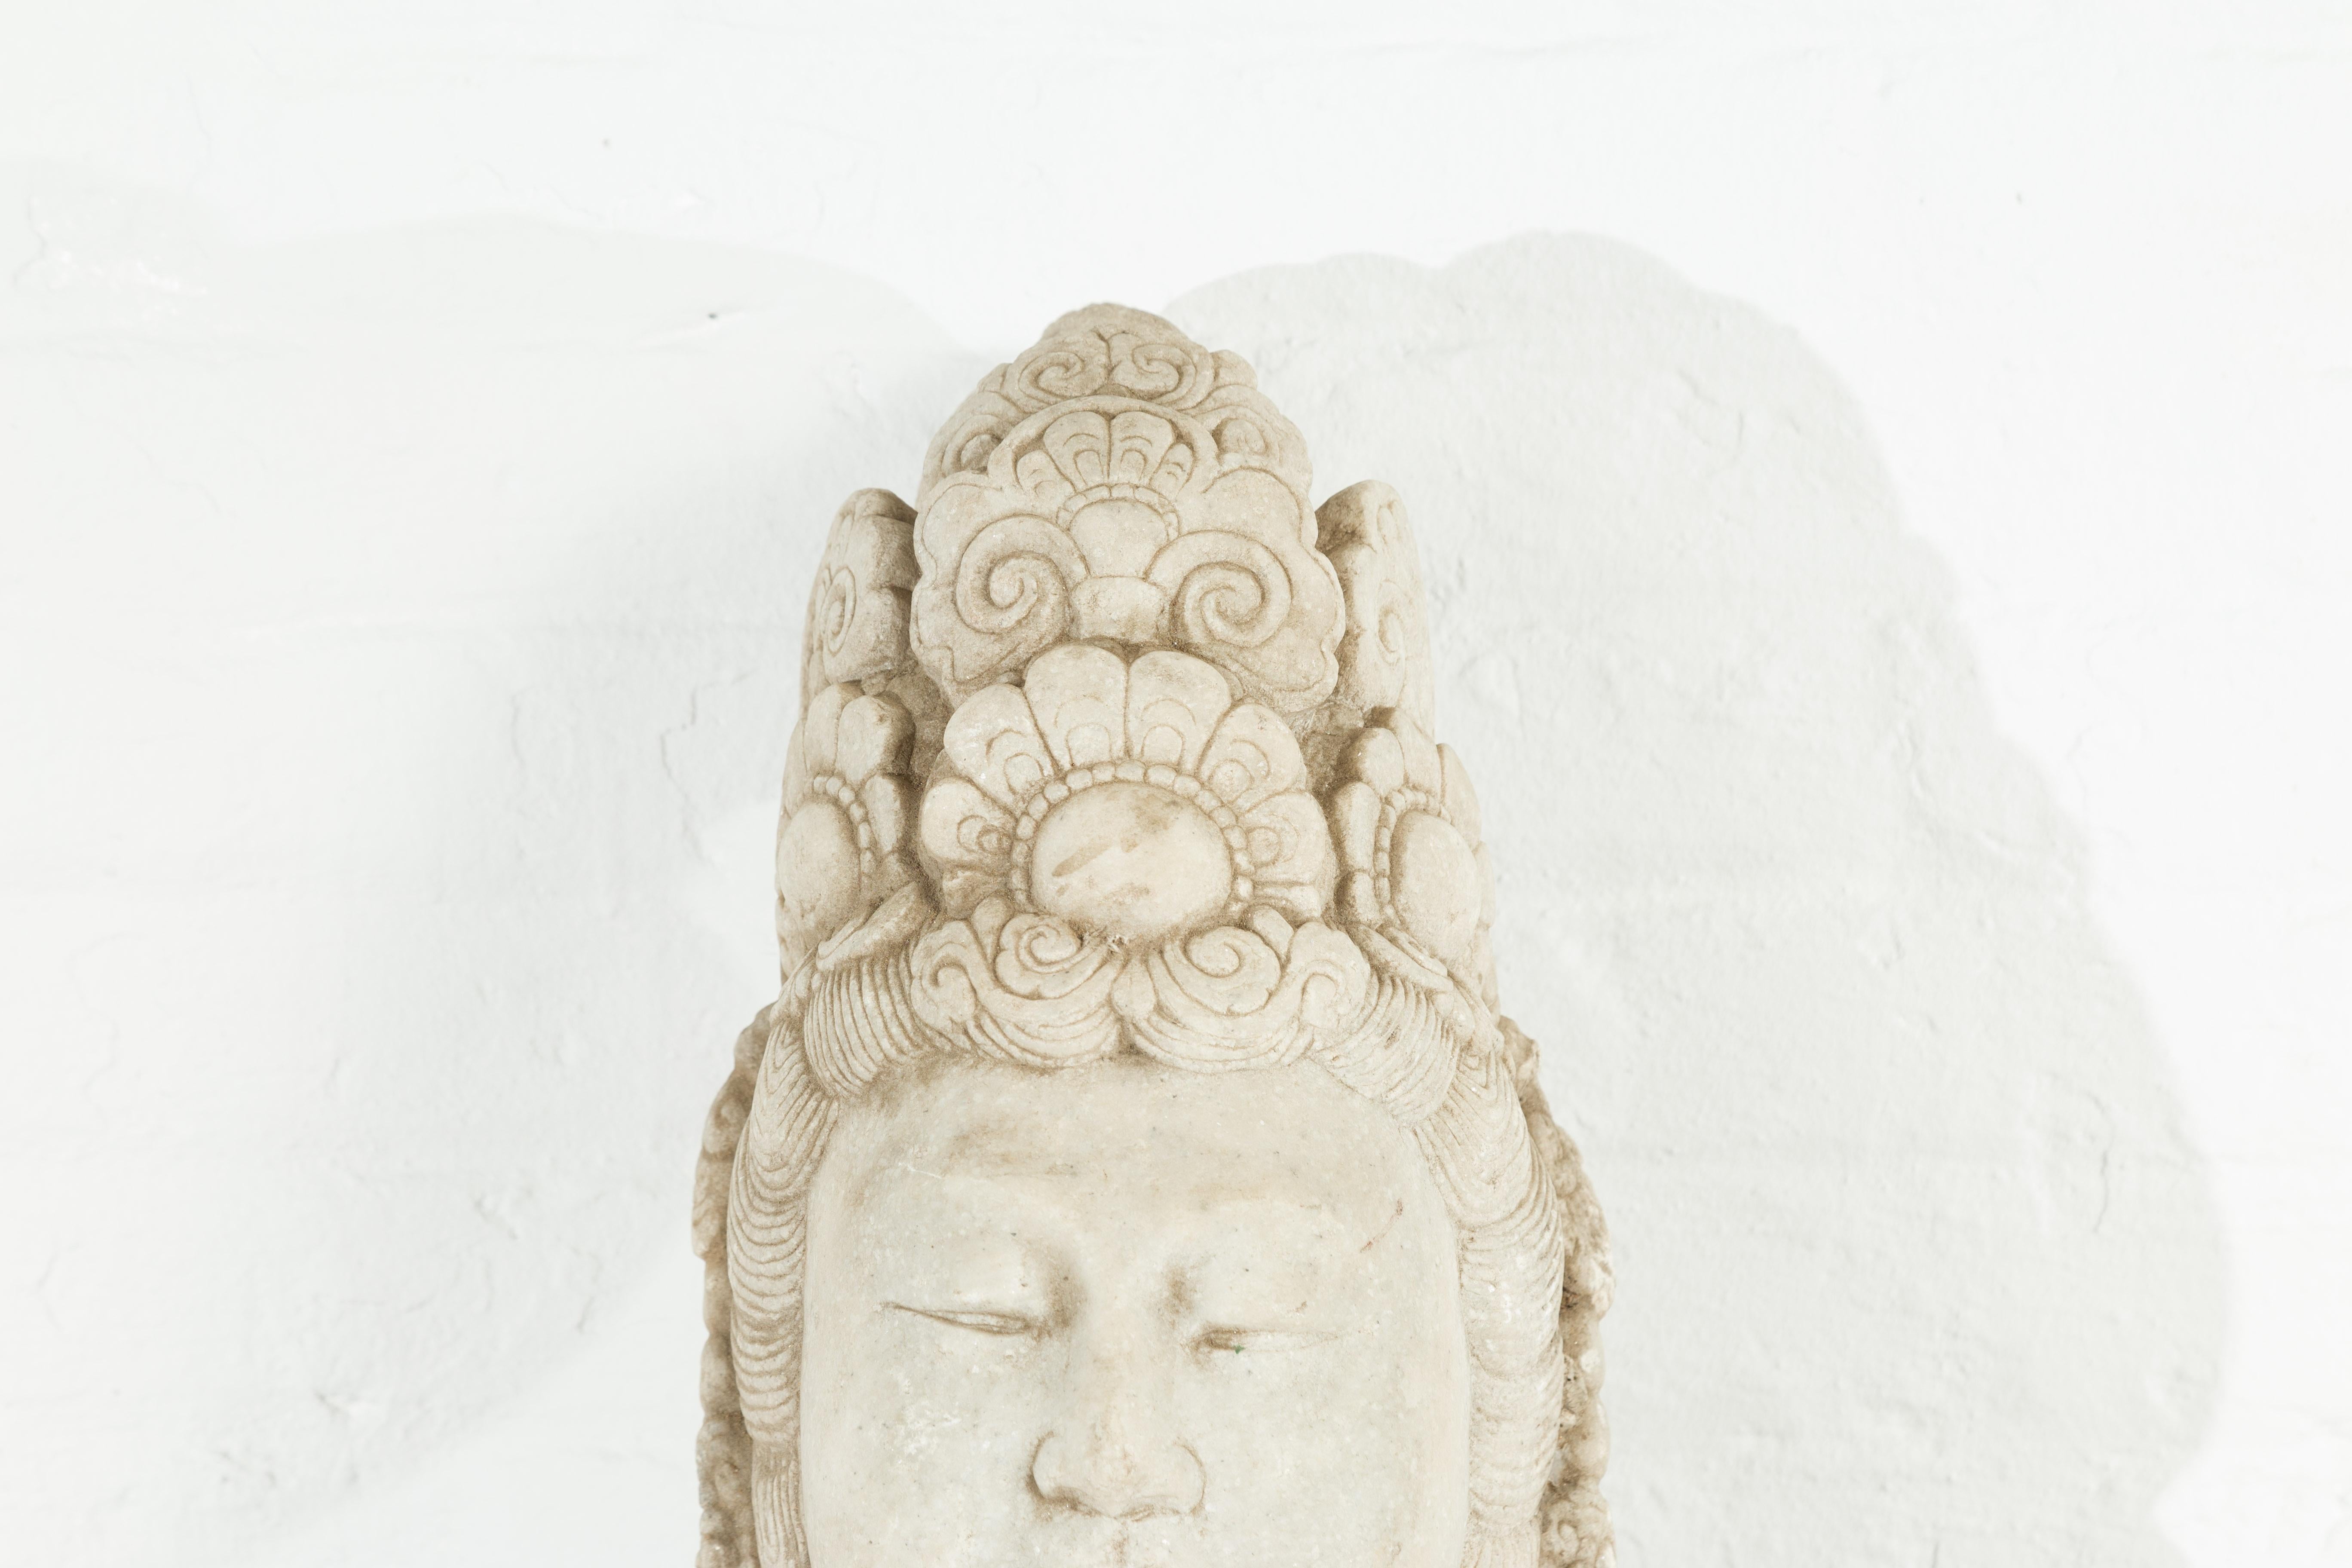 Vintage Chinese Carved Stone Bust of Guanyin the Bodhisattva of Compassion In Good Condition For Sale In Yonkers, NY